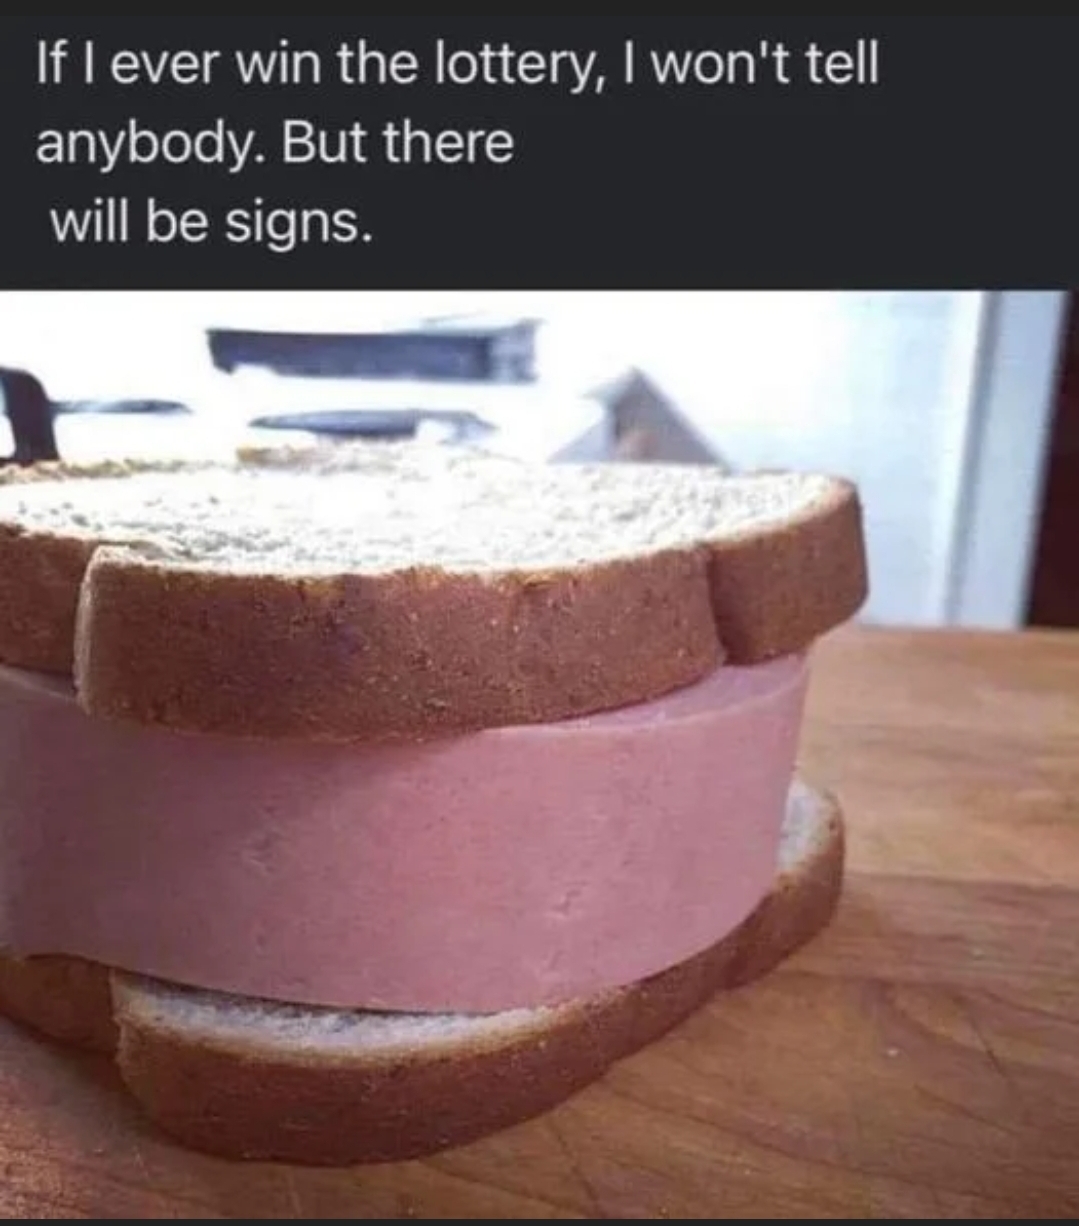 I wish I could win. - Humor, 9GAG, Success, Picture with text, A sandwich